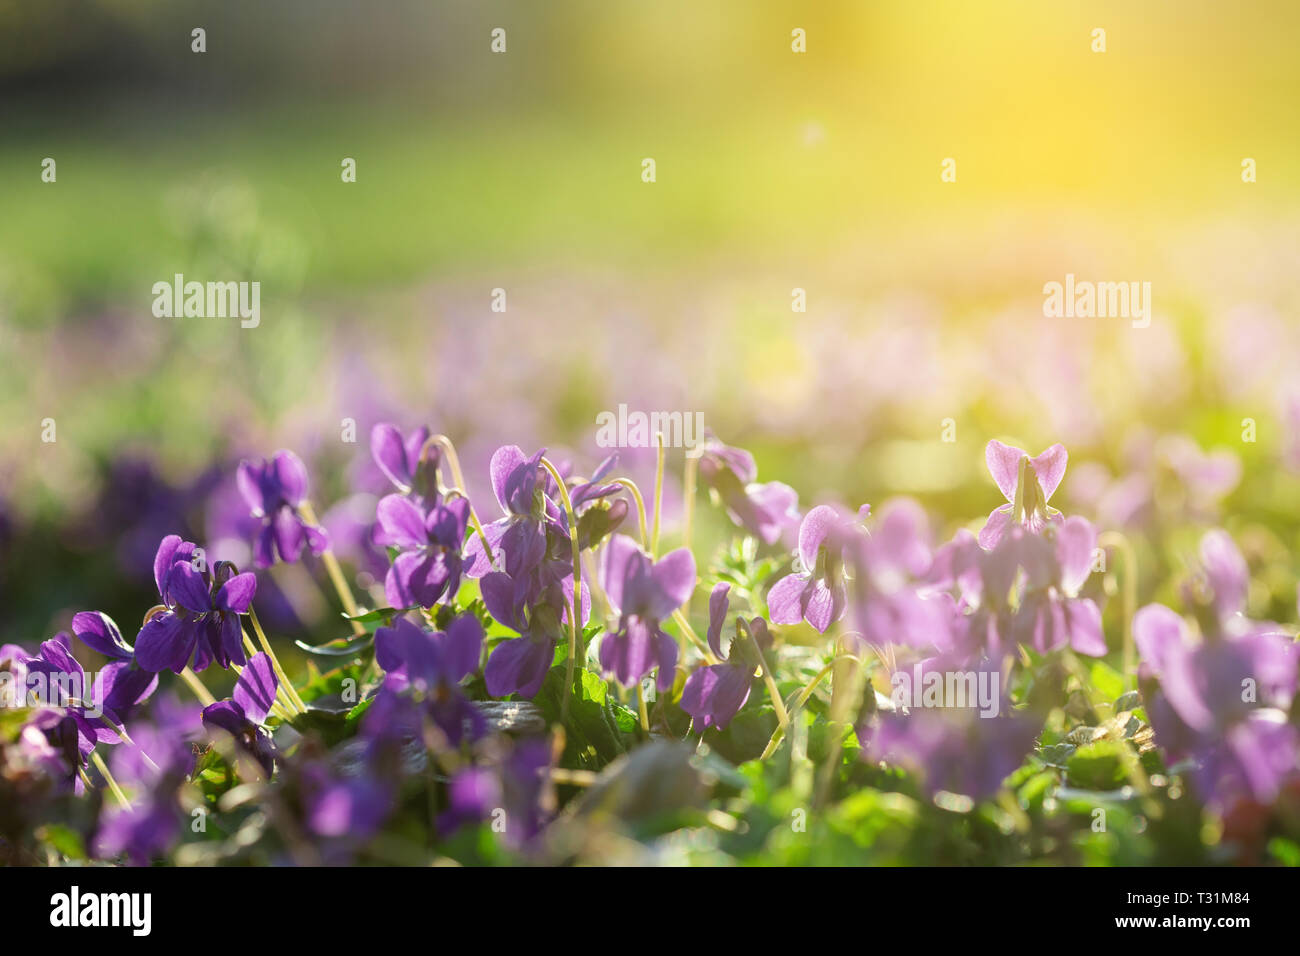 Beautiful Young and Fresh Wild Violets or Violas In the Sunny Early Spring Garden Stock Photo